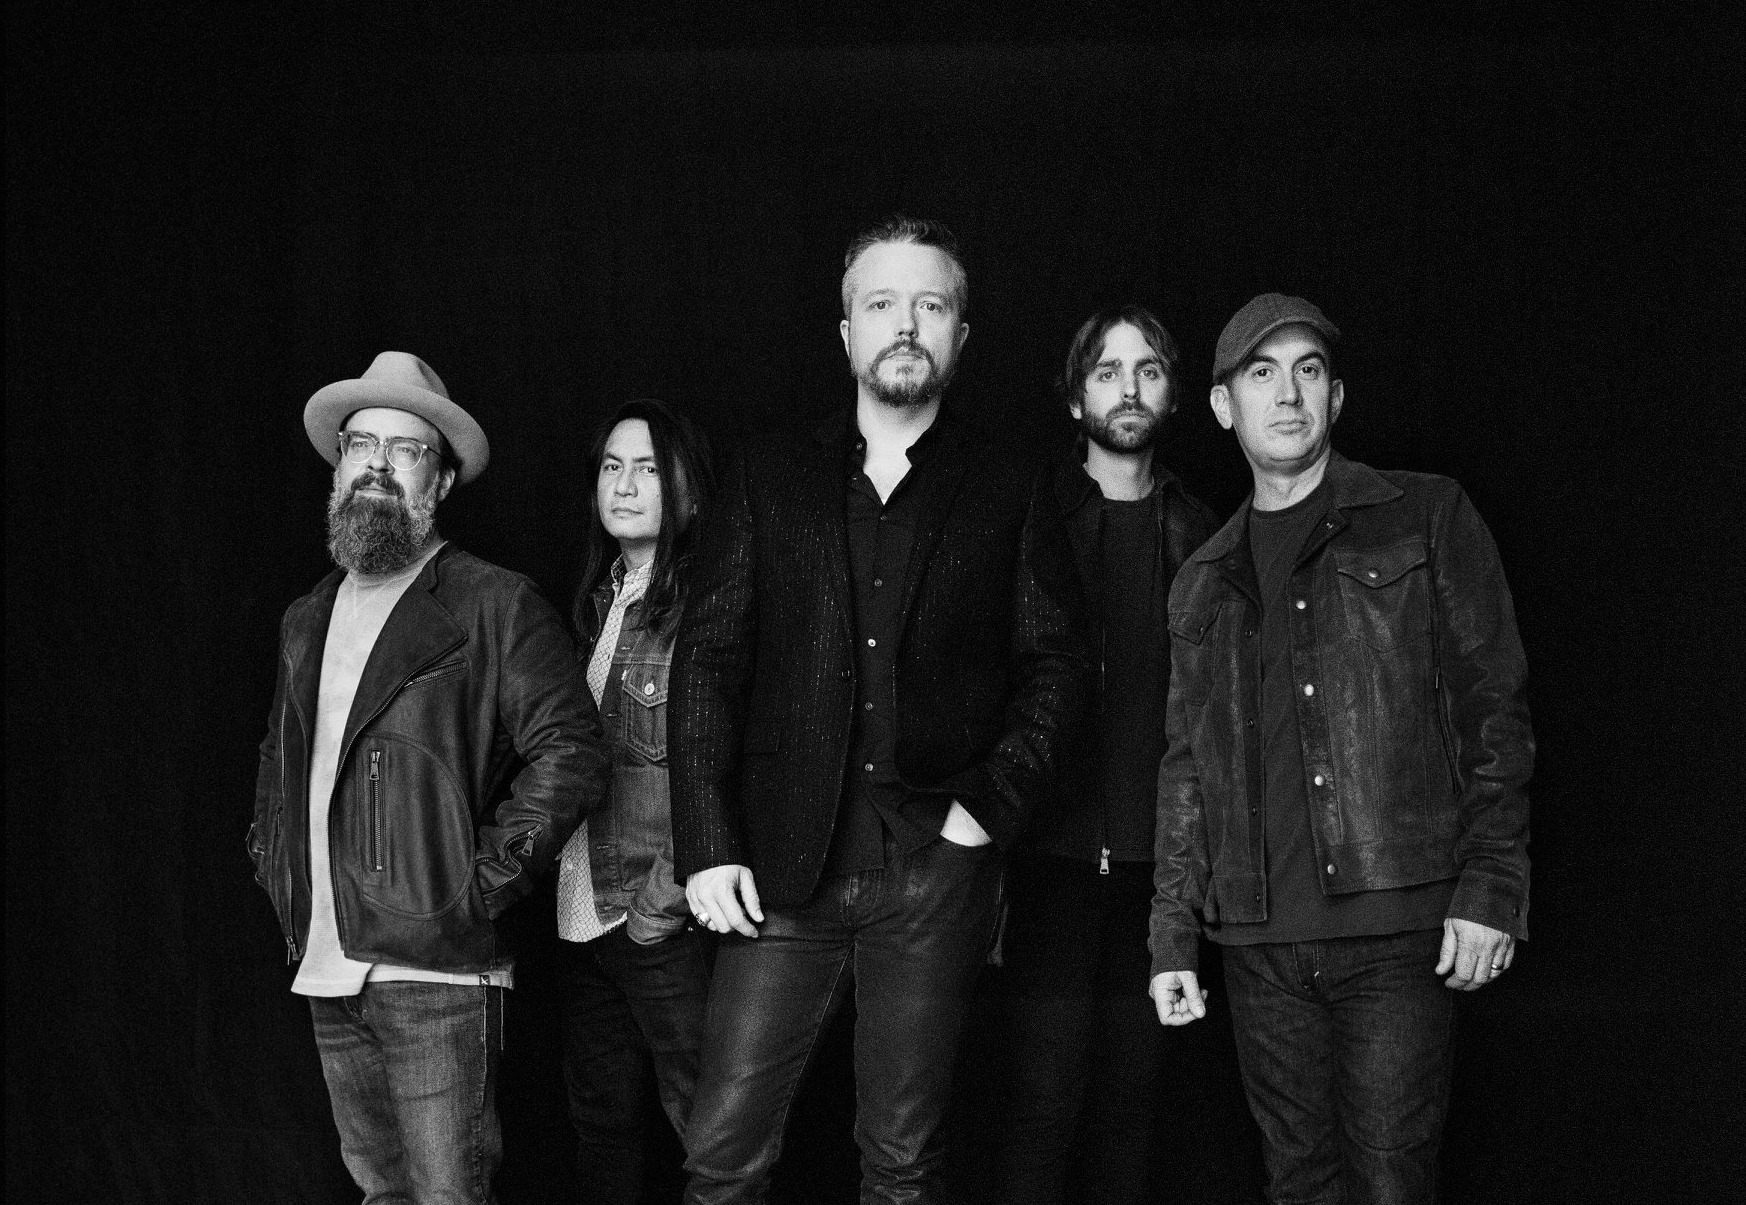 Jason Isbell and the 400 Unit - Official Website